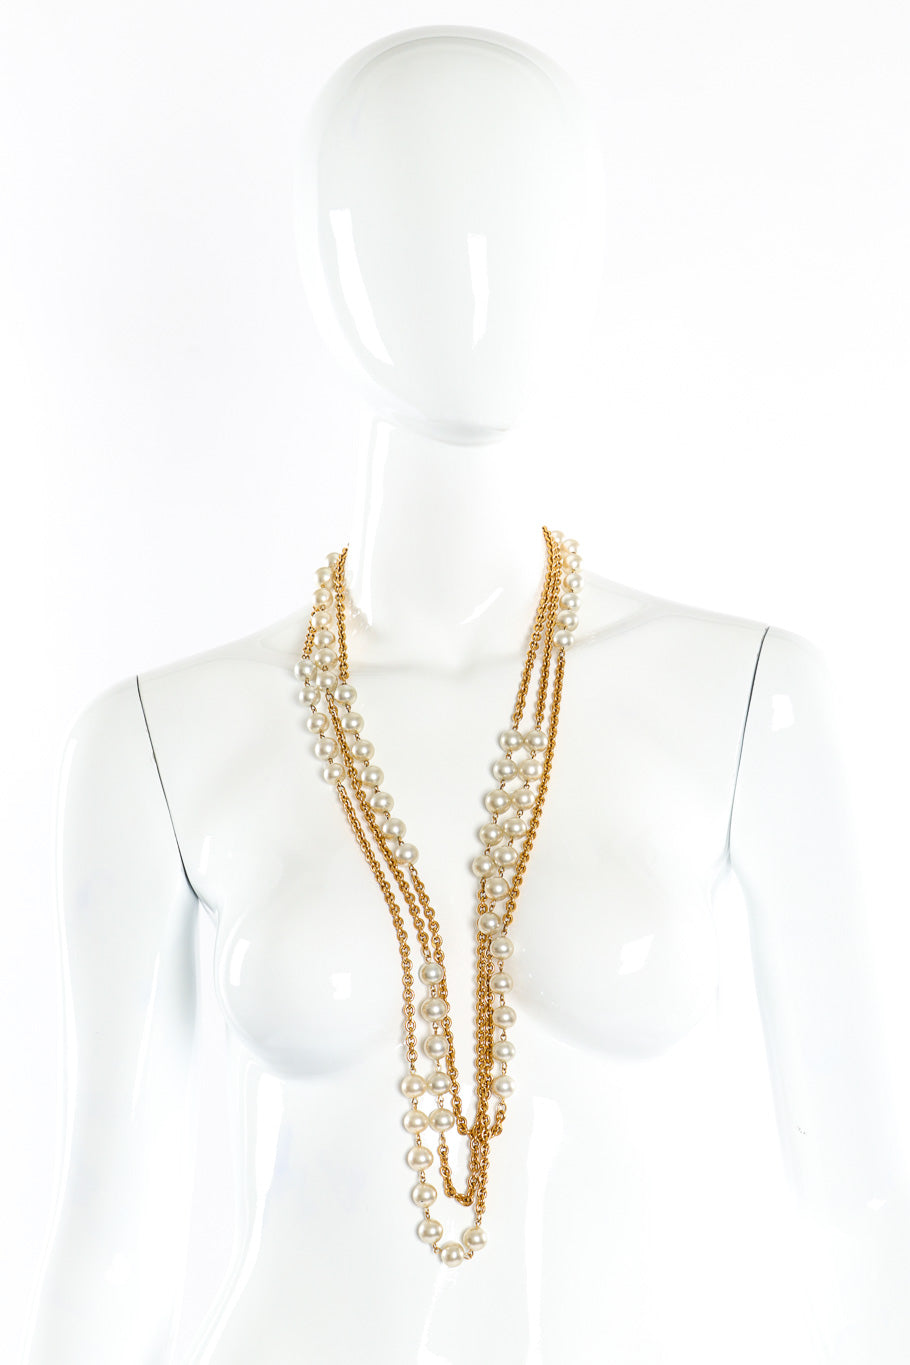 Chanel Gold Multi Layered Chain and Pearl Necklace